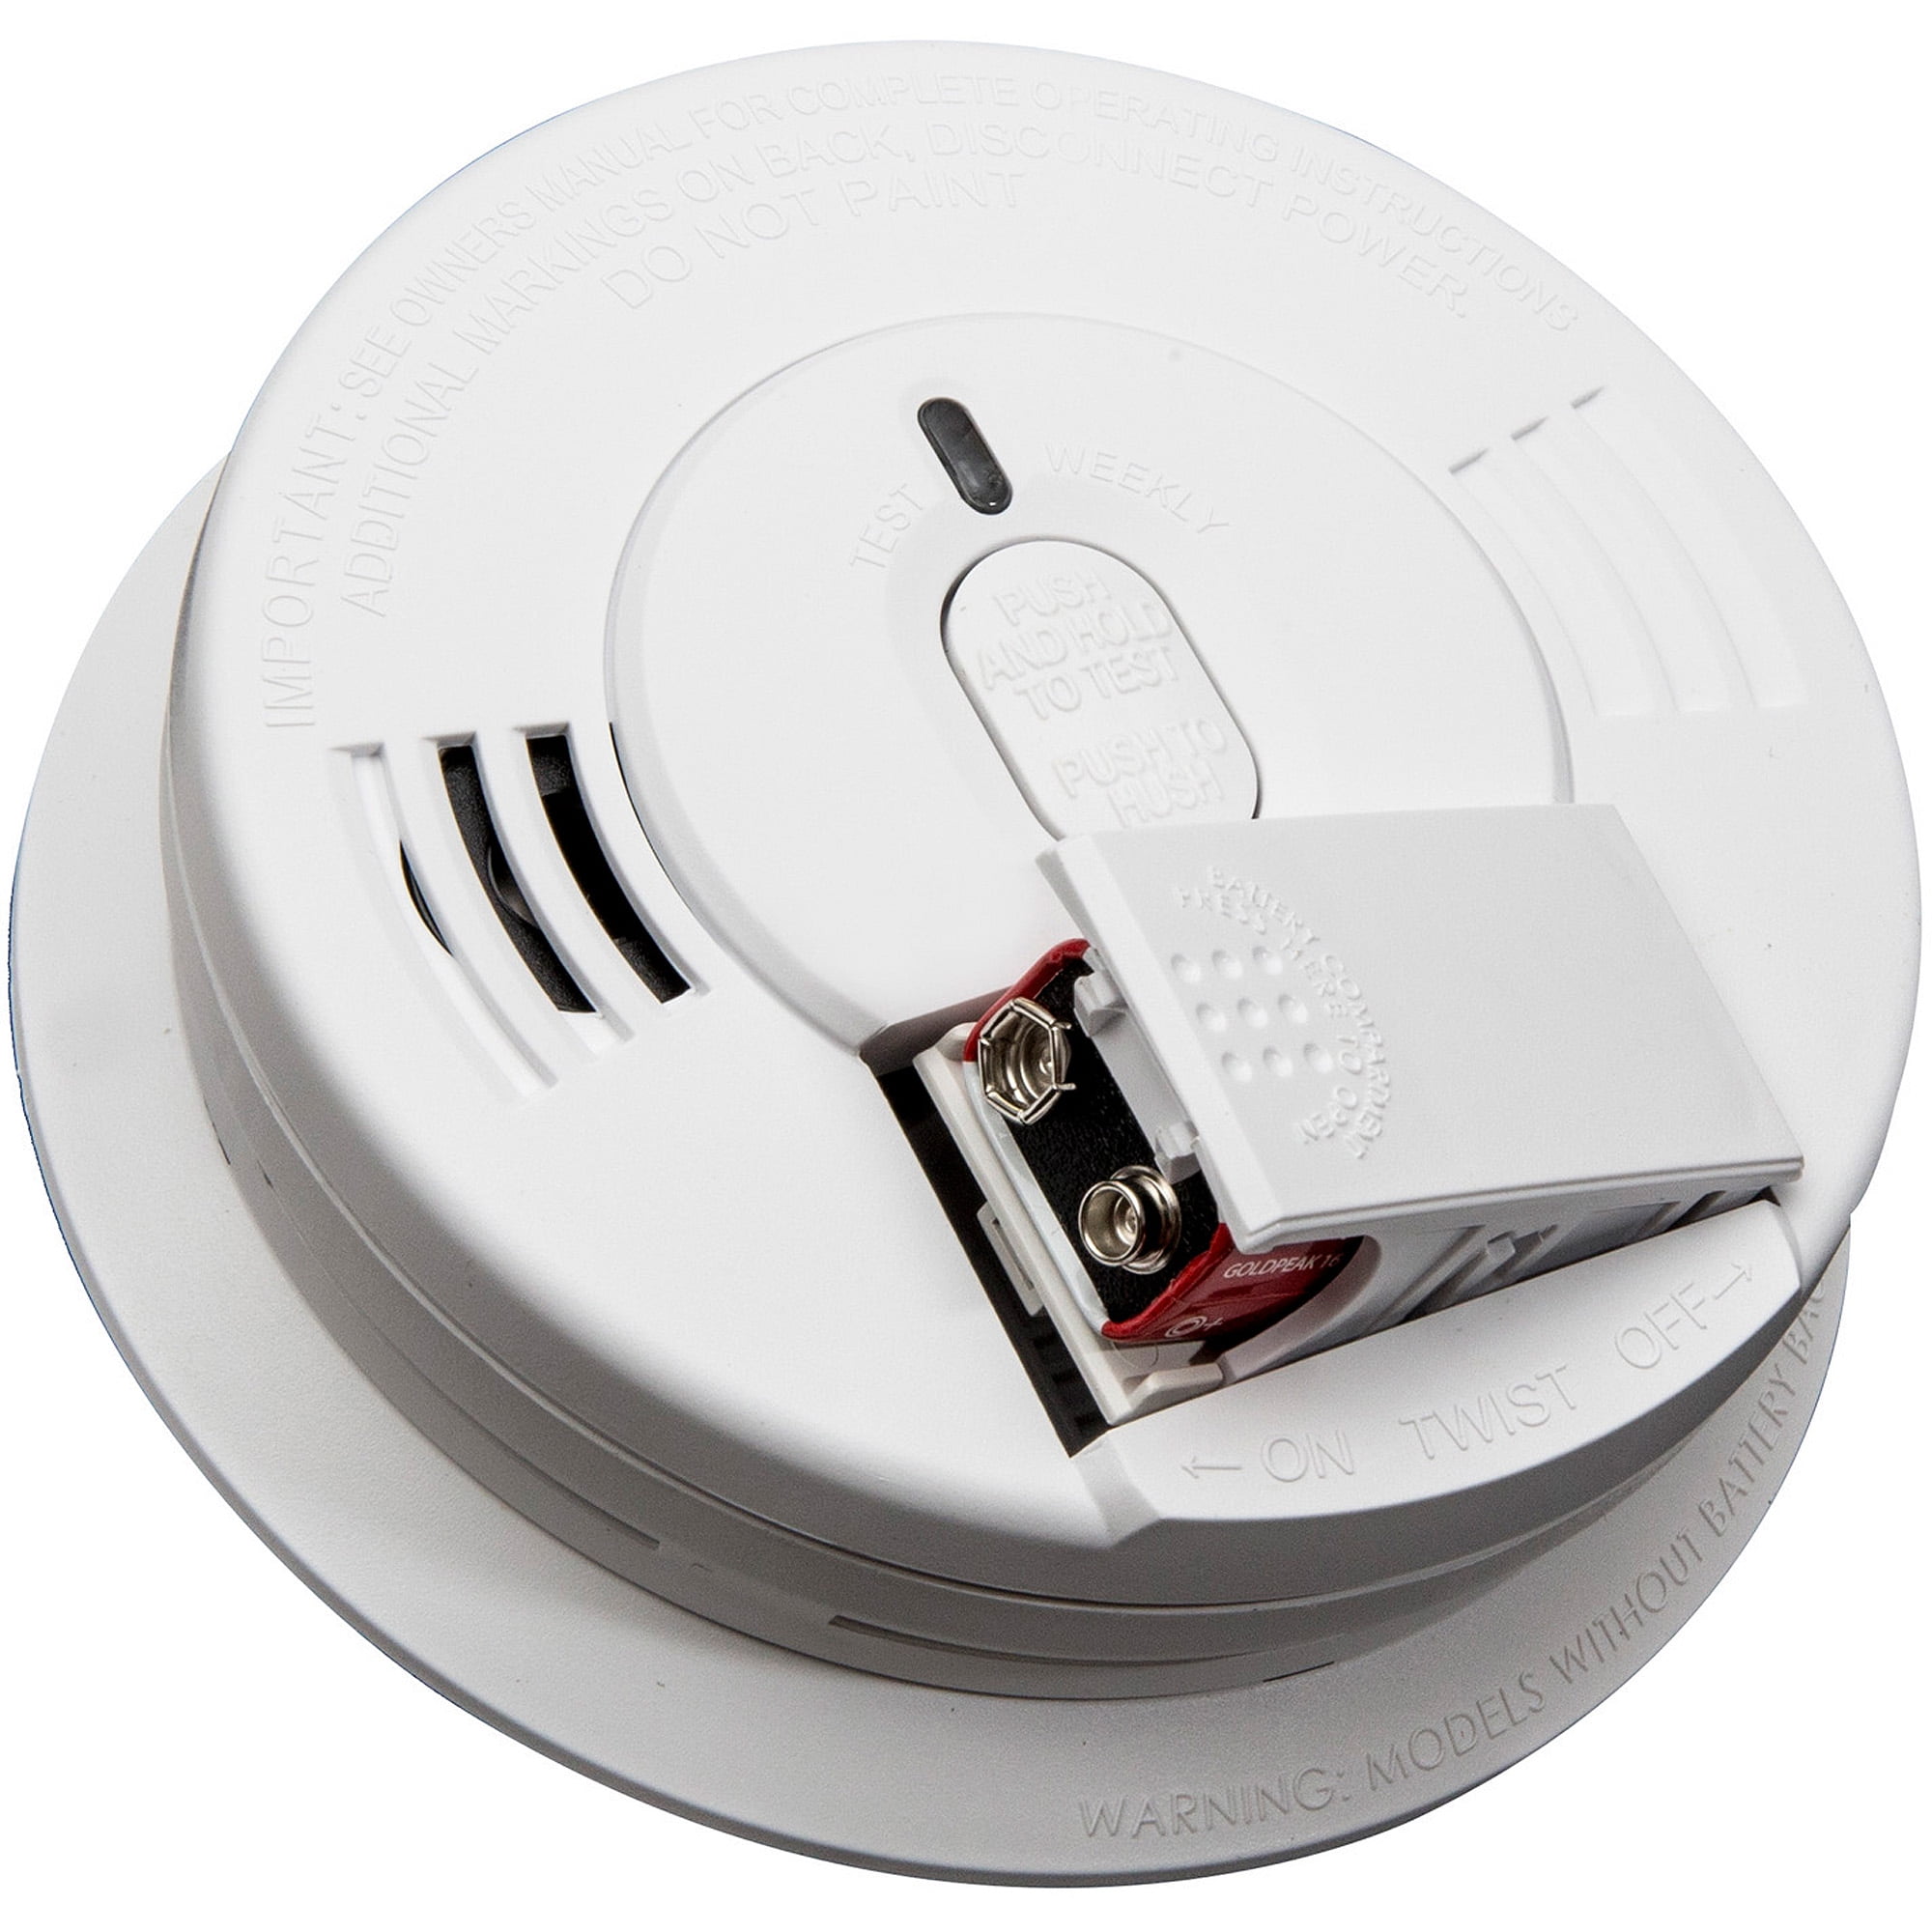 Which is better hardwired or battery smoke detectors?